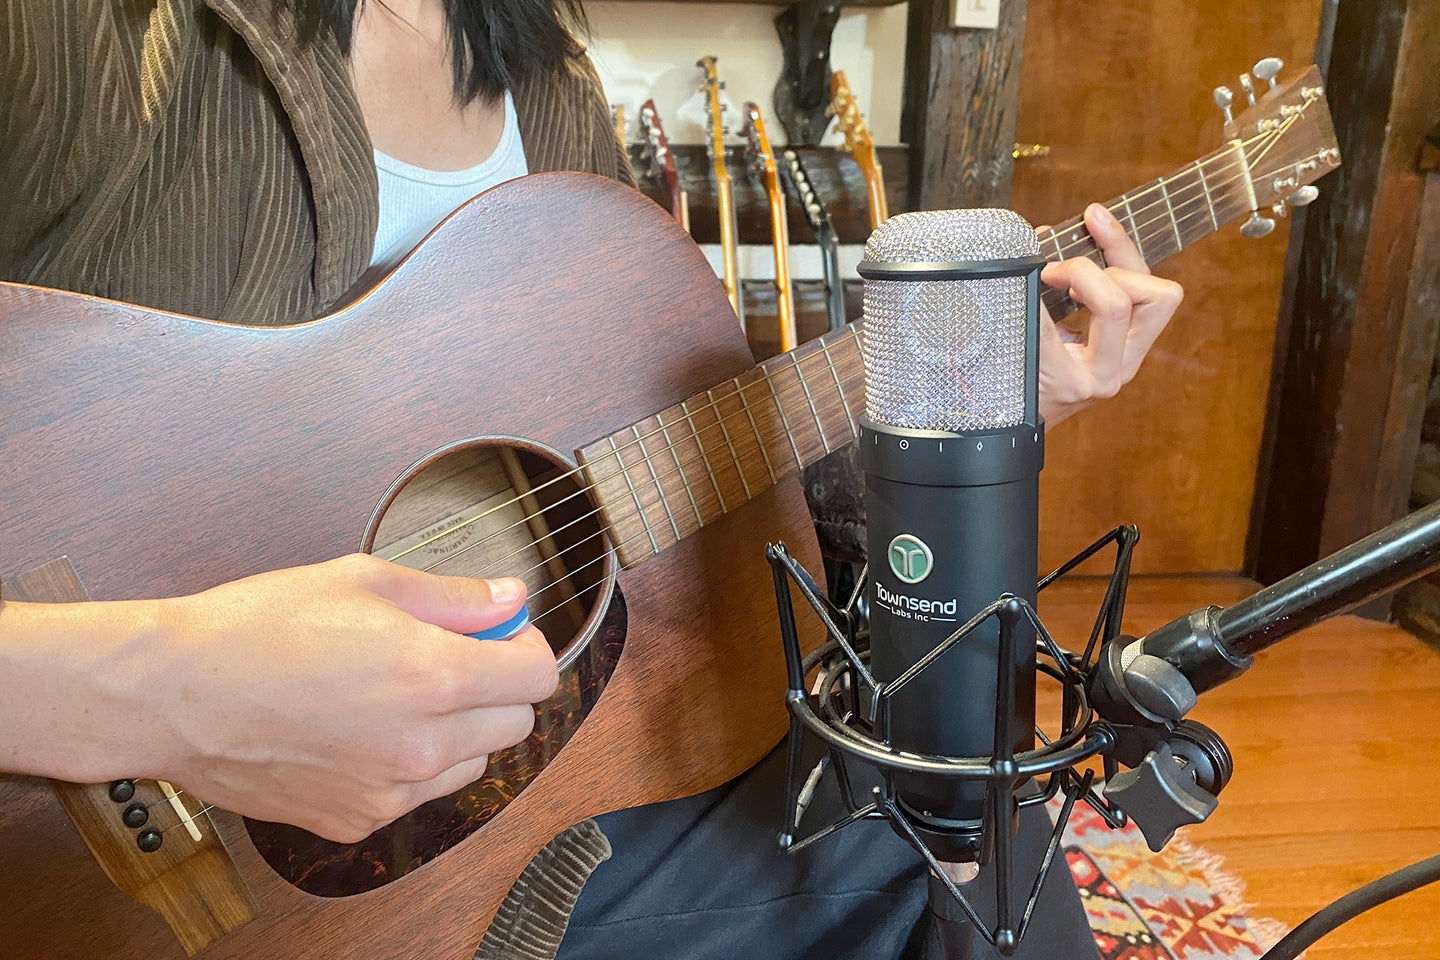 Twonsend Labs Sphere L22 modeling mic and an acoustic guitar